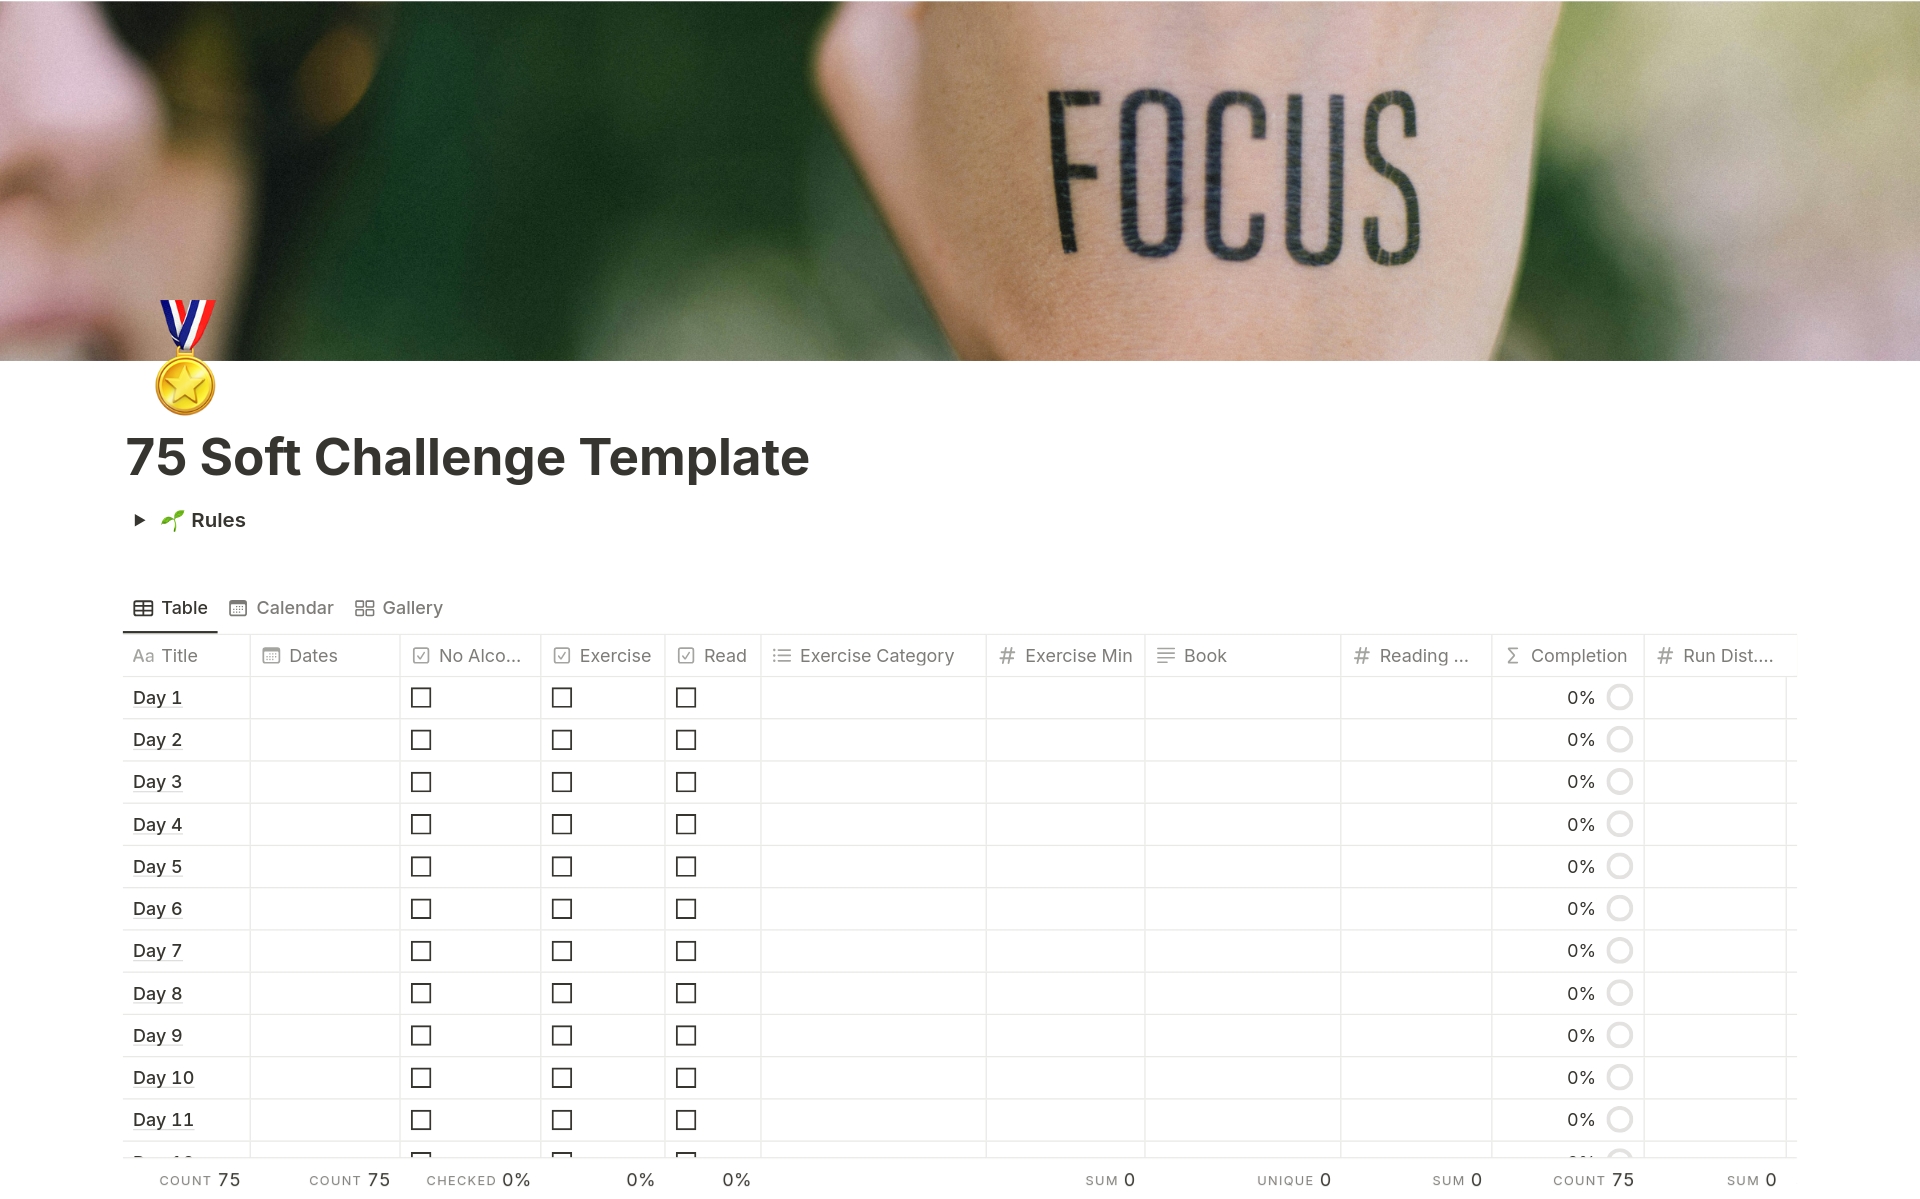 This is a customizable template to help track your daily progress during the 75-day soft challenge